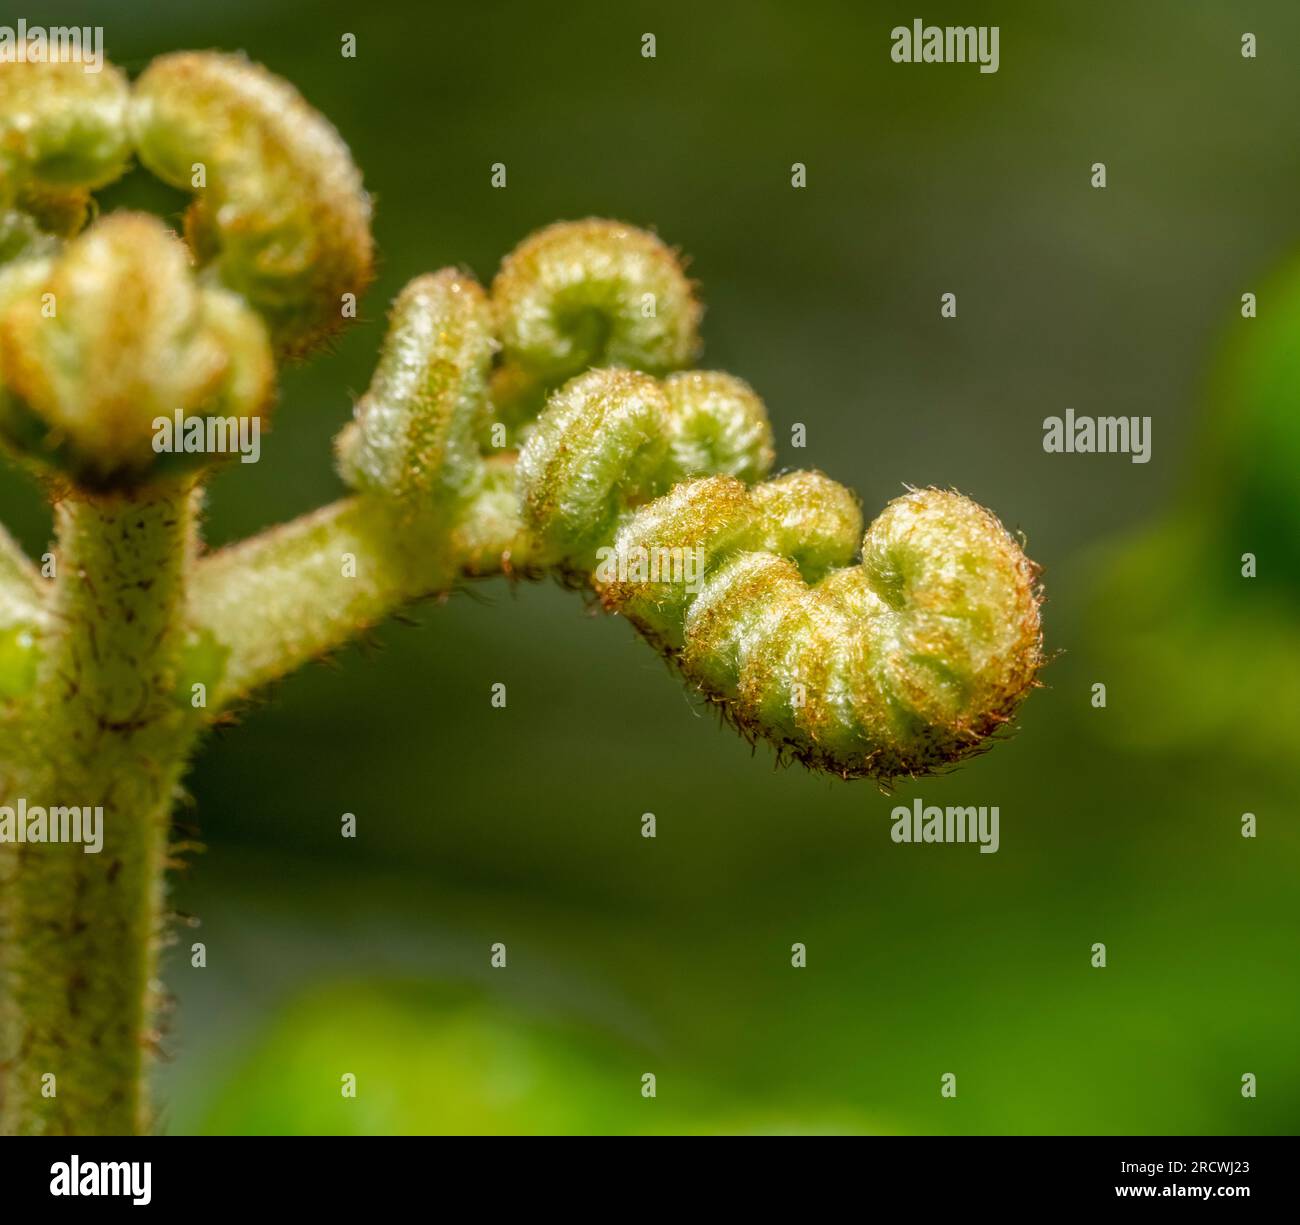 Closeup shot showing a young rolled eagle fern frond Stock Photo